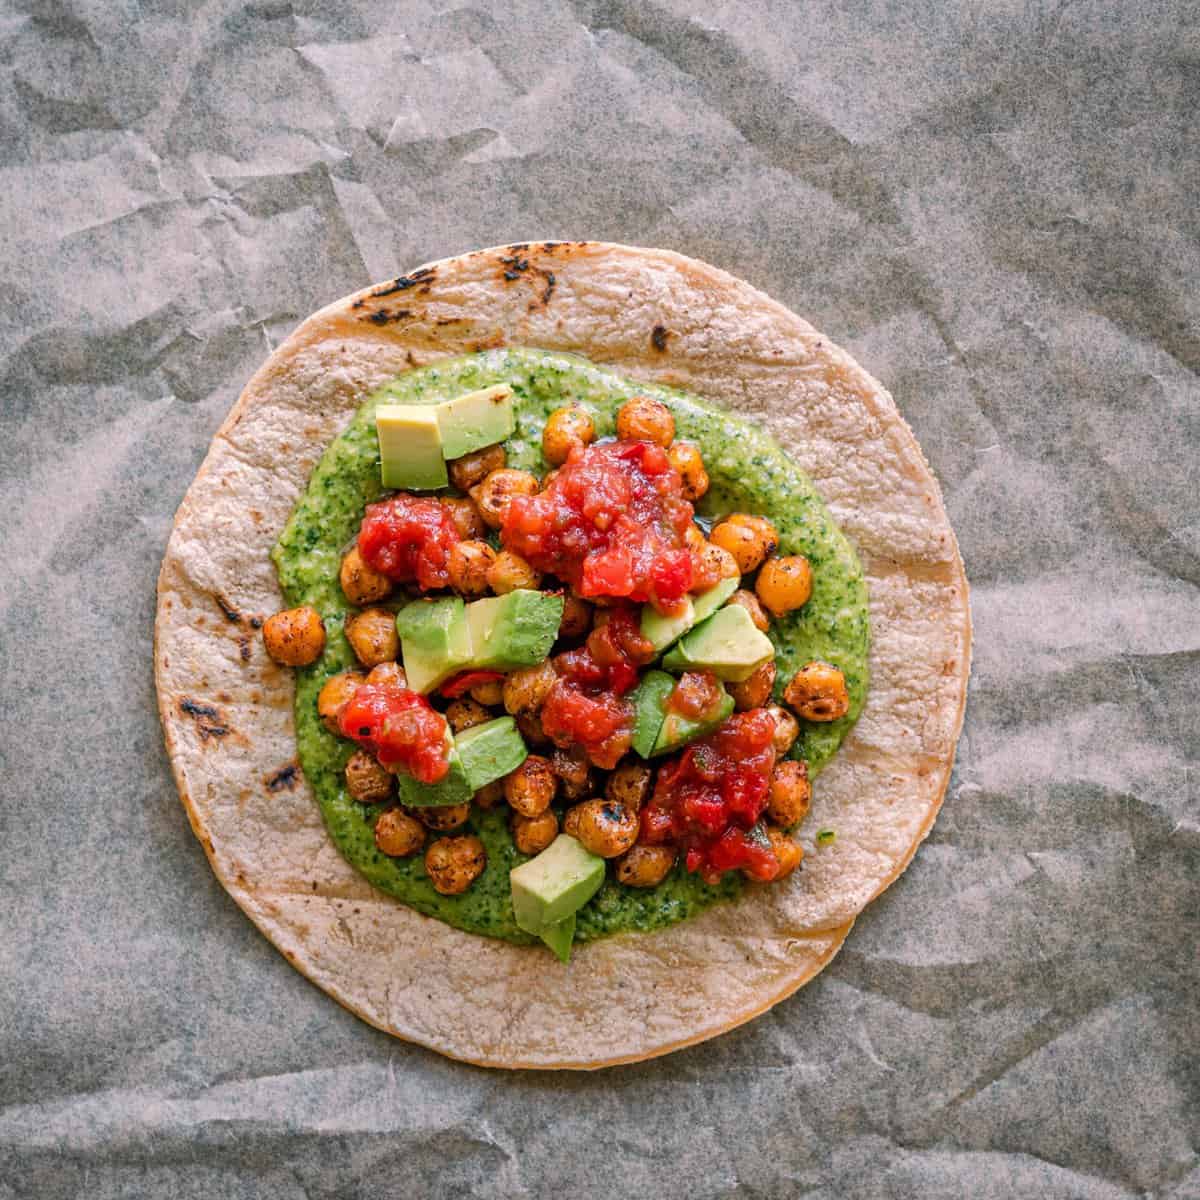 assembling tacos - charred corn tortilla with cilantro pesto, spiced chickpeas, avocado, and salsa on top